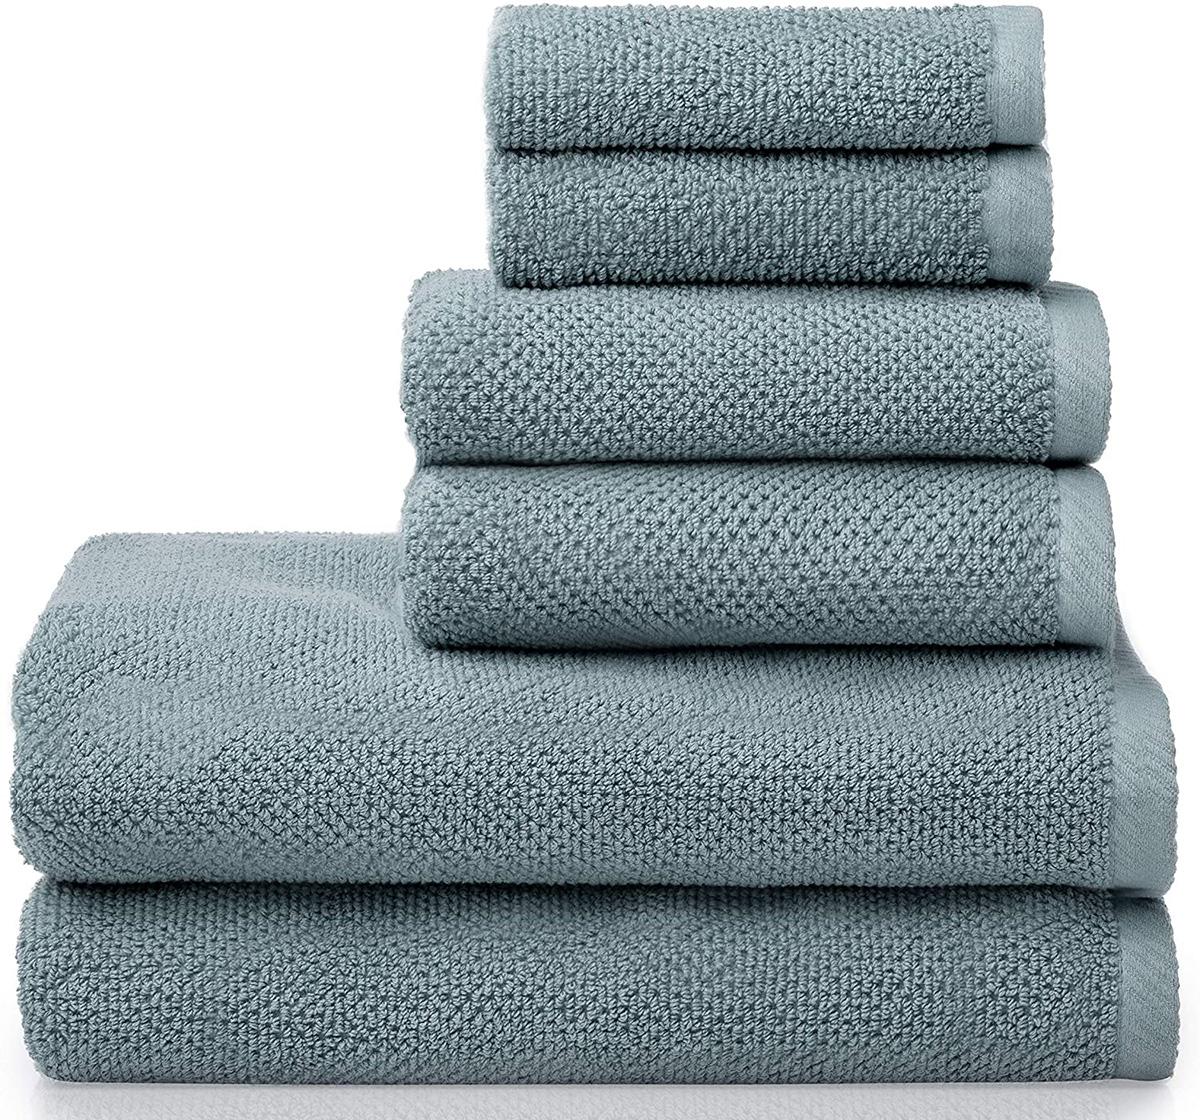 6 Welhome Franklin Cotton Textured Towels for $29.99 Shipped